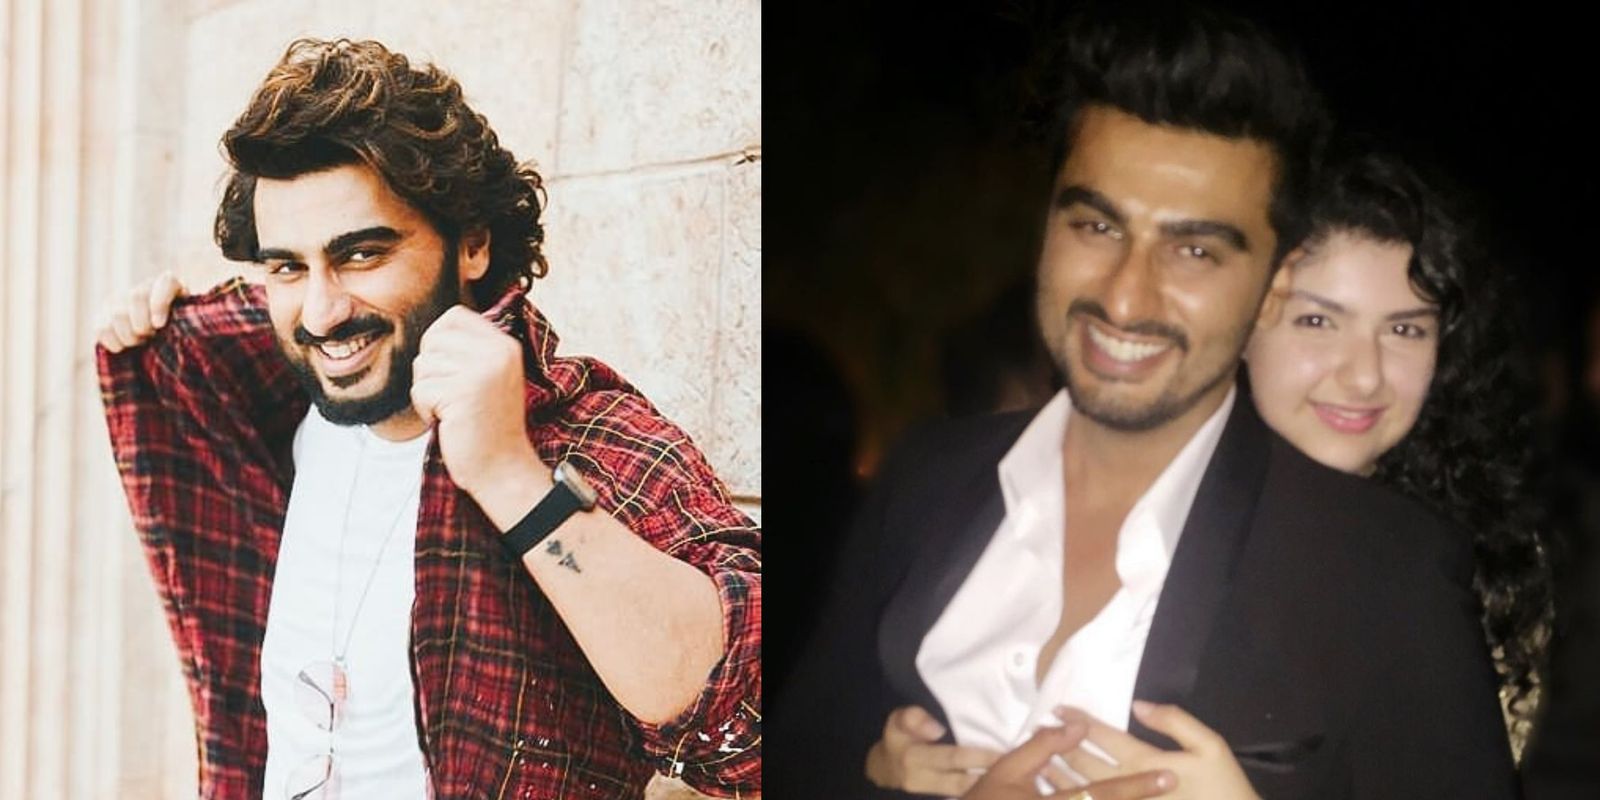 Arjun Kapoor explains the meaning behind his tattoo that he got for sister Anshula